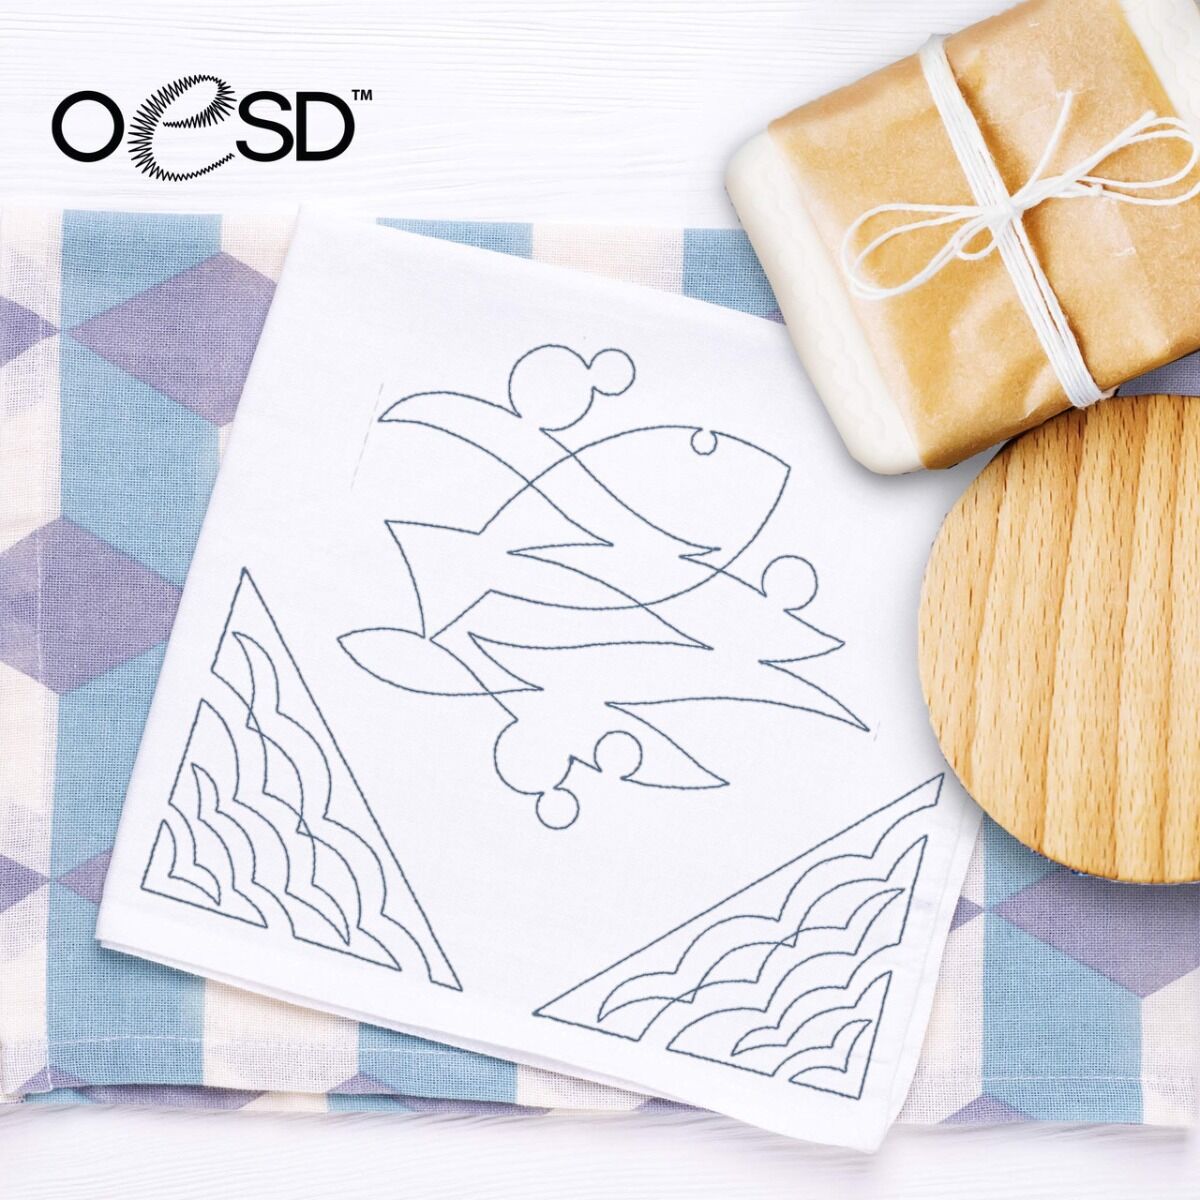 OESD Lake Life Quilting USB Embroidery Collection,OESD Lake Life Quilting USB Embroidery Collection,OESD Lake Life Quilting USB Embroidery Collection